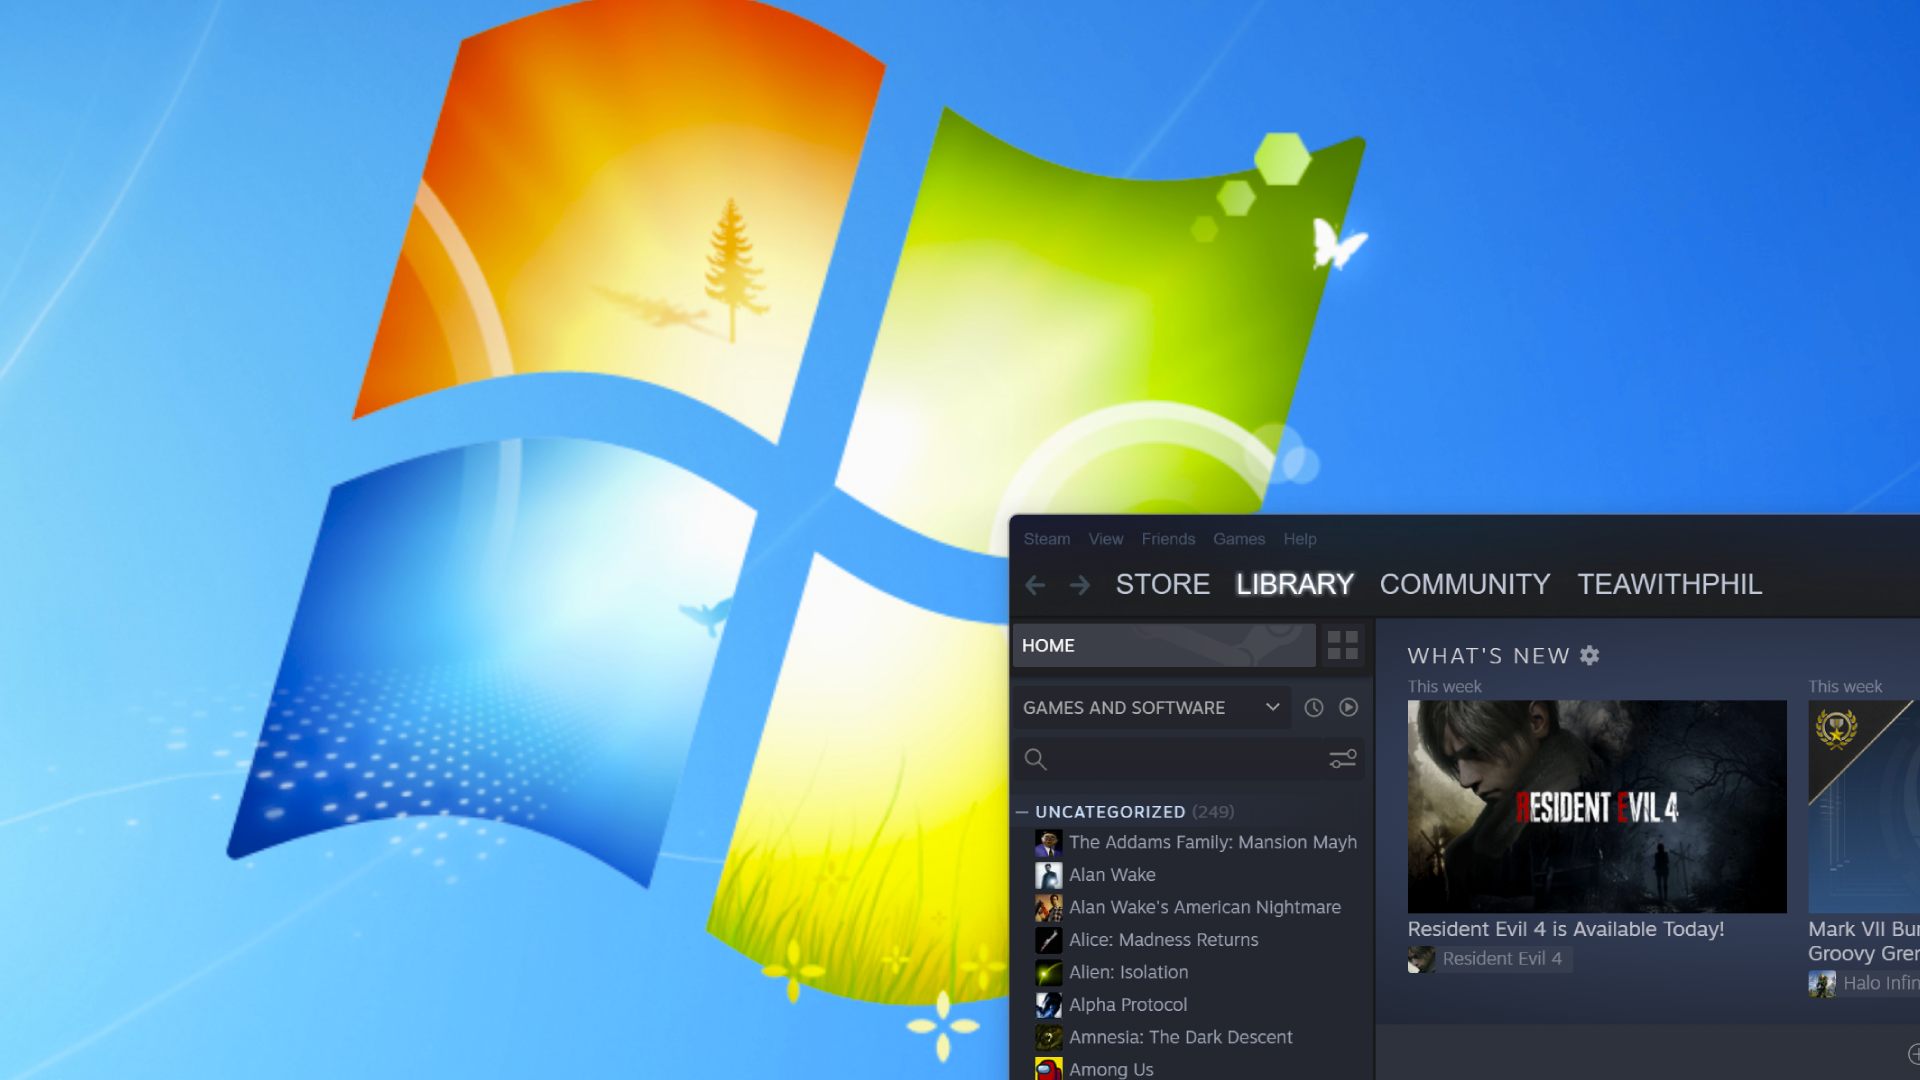 Windows 7 wallpaper with Steam app at right corner of screen